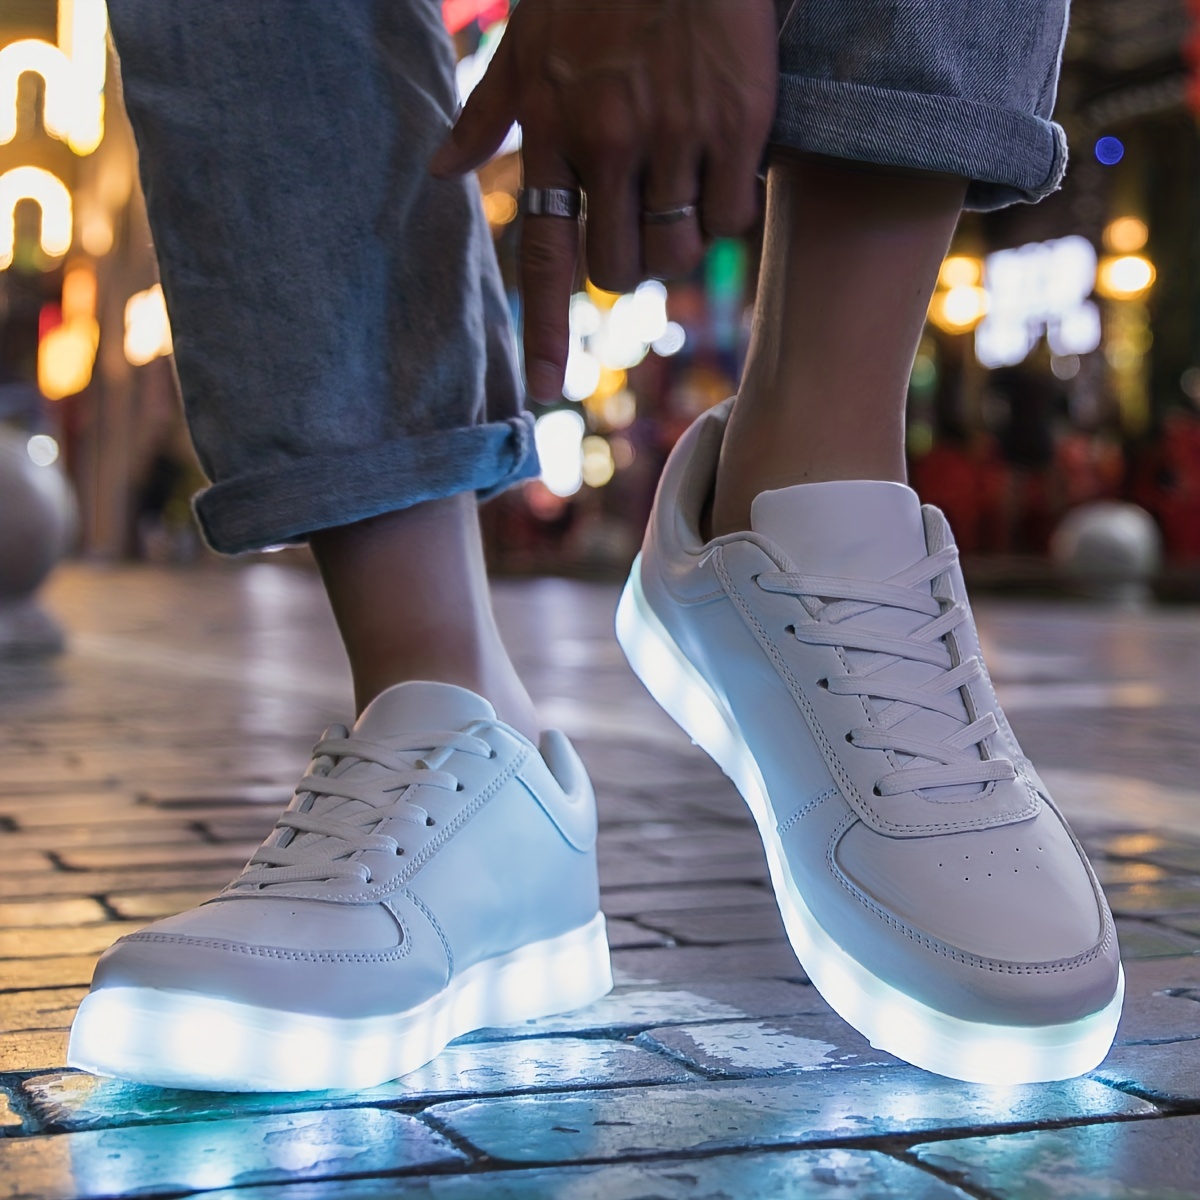  PYYIQI LED Light Up Shoes for Women Men Sports LED Shoes  Dancing Sneakers Low-Top USB Charging Shoes for Kids | Fashion Sneakers